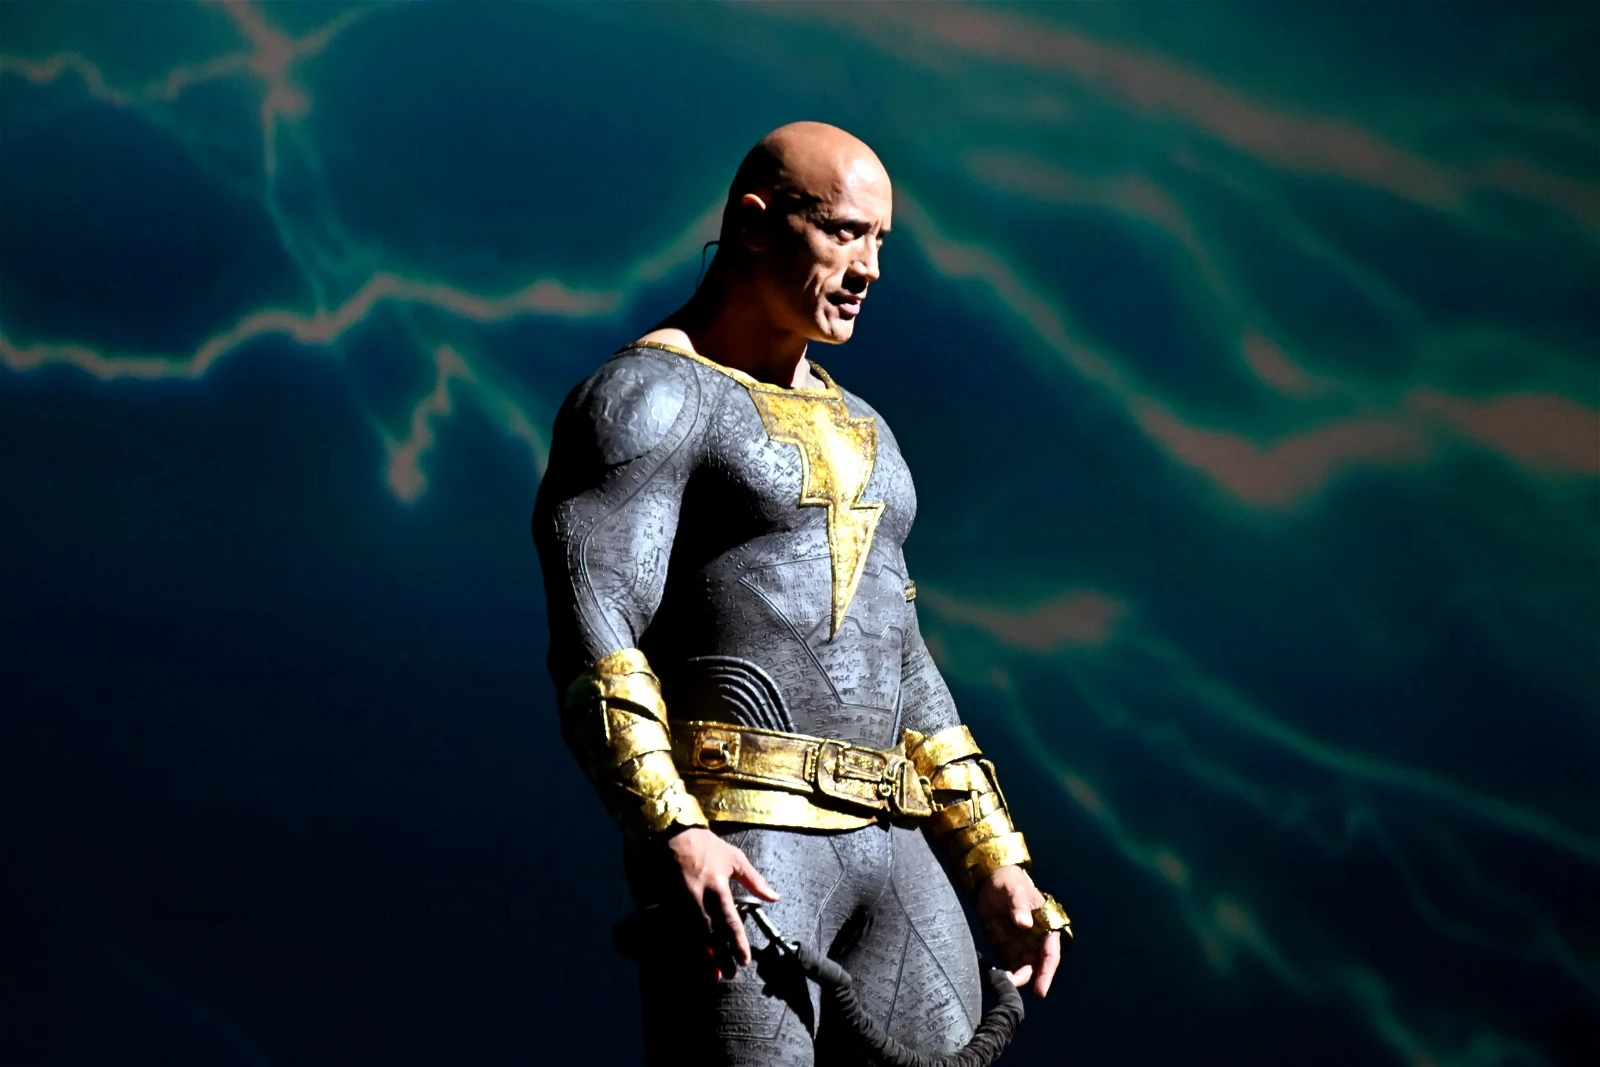 Dwayne Johnson in his Black Adam costume at the SDCC 2022.